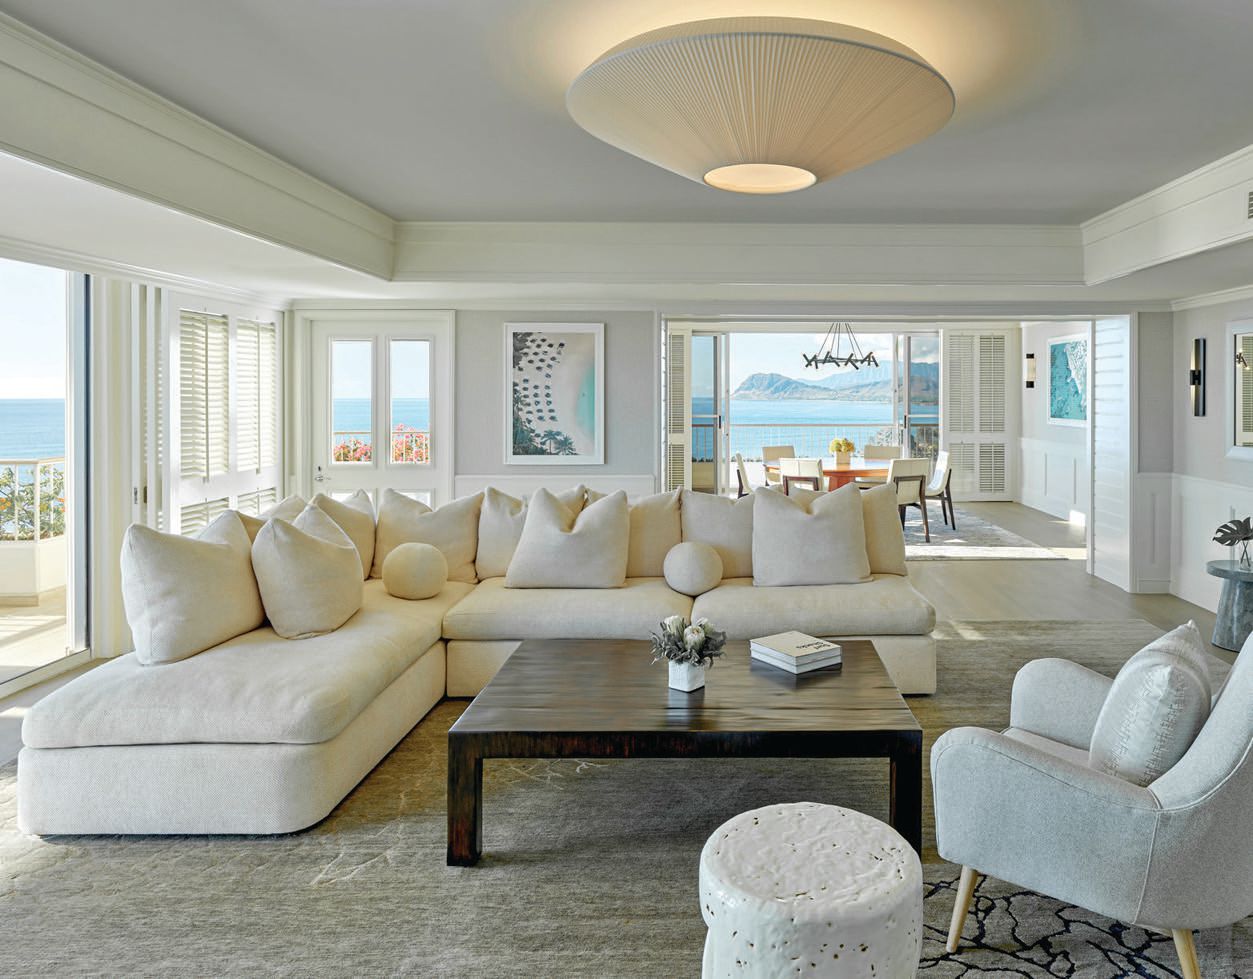 Gray Malin artwork welcomes guests to the suite PHOTO COURTESY OF FOUR SEASONS RESORT OAHU AT KO OLINA